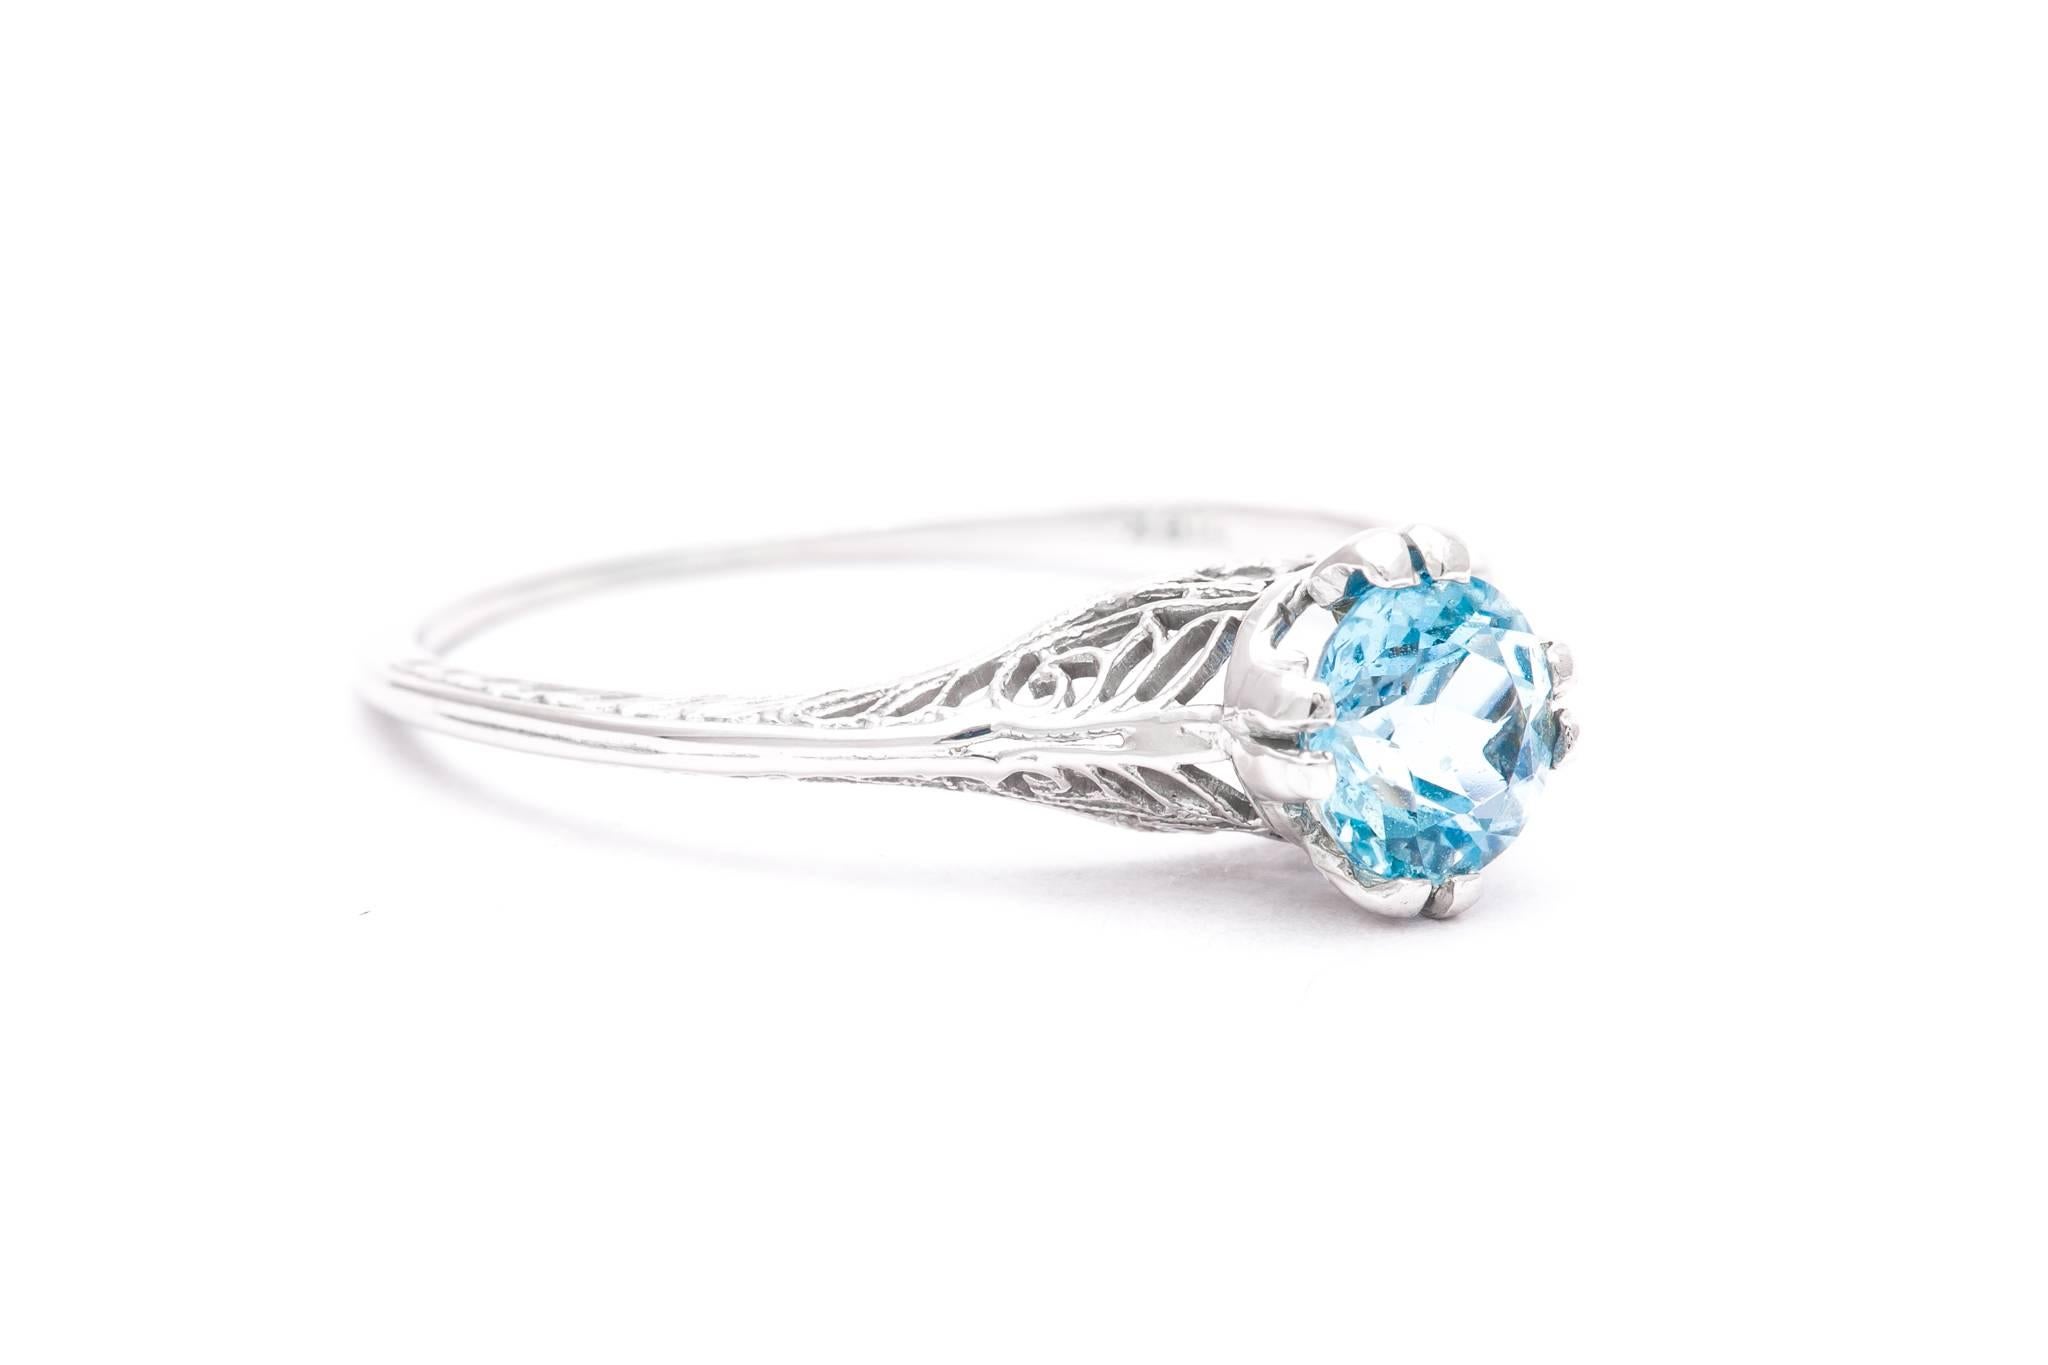 An art deco period aquamarine solitaire filigree ring in 18 karat white gold.  IN excellent condition, this hand crafted art deco period ring features a 0.75 carat European cut aquamarine set in a beautiful filigree mounting.

Grading as beautiful